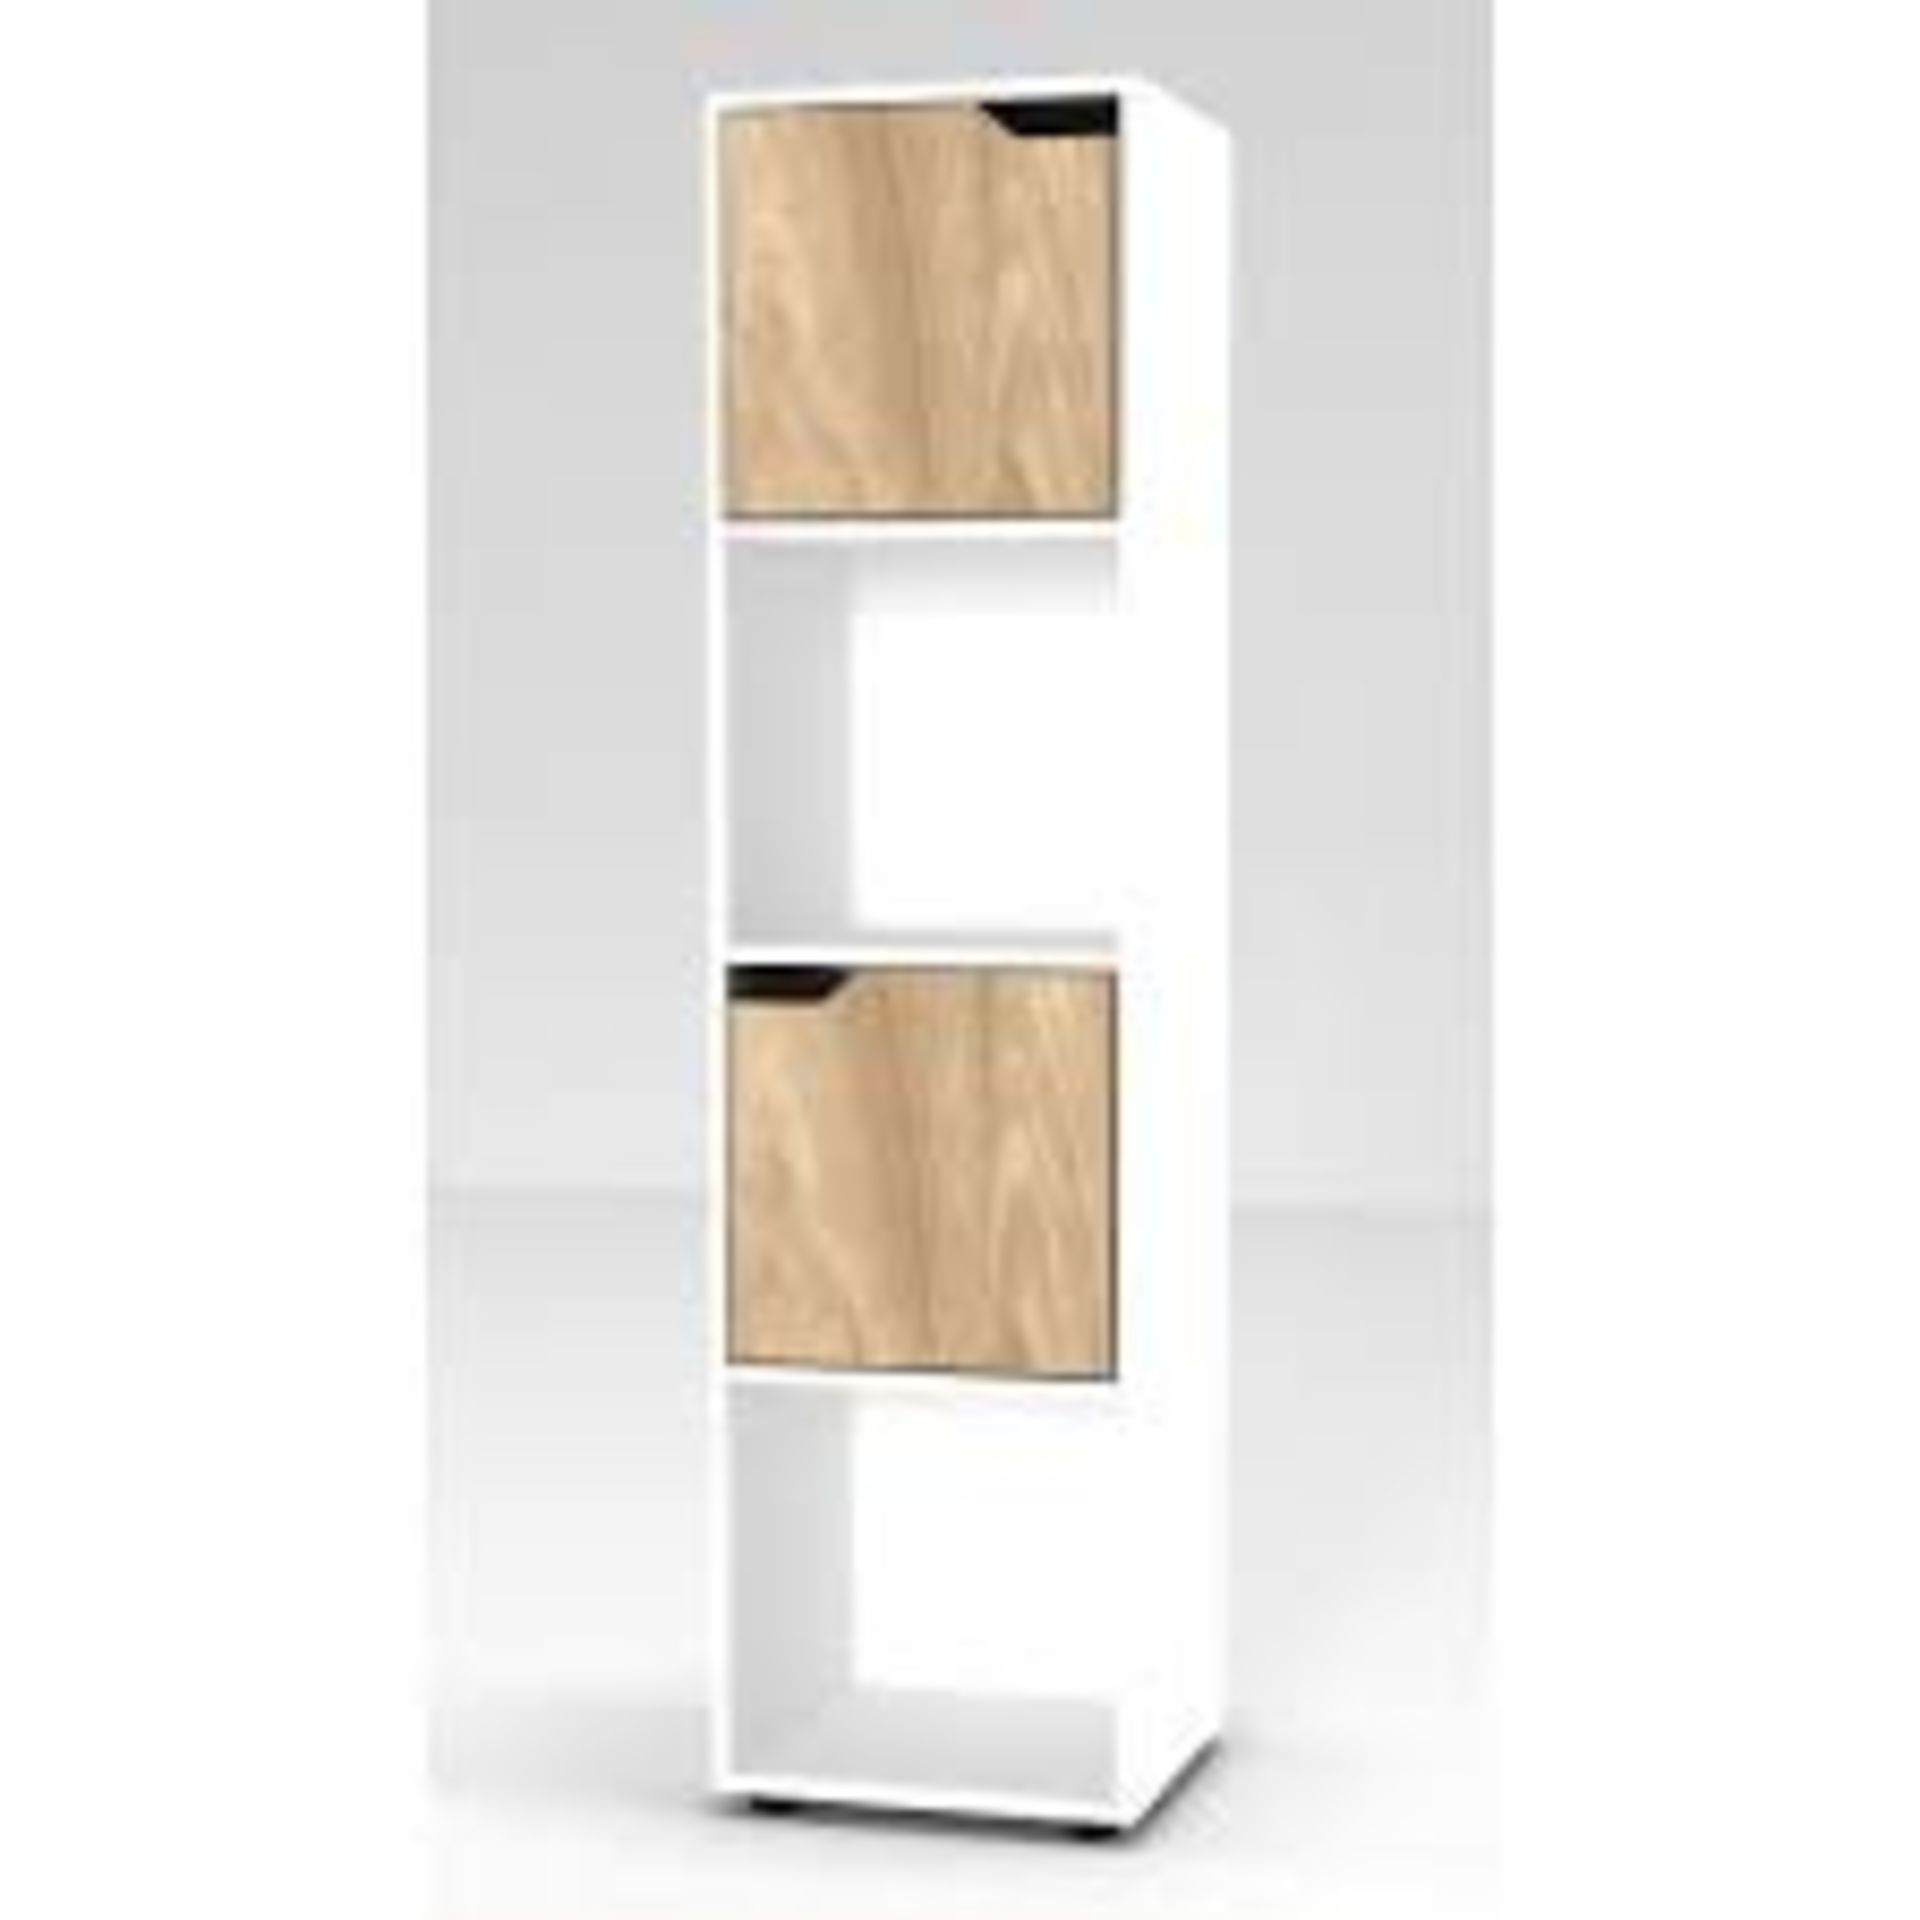 Boxed 17 Stories Kalyn White Oak Bookcase RRP £40 (18530) (Pictures Are For Illustration Purposes